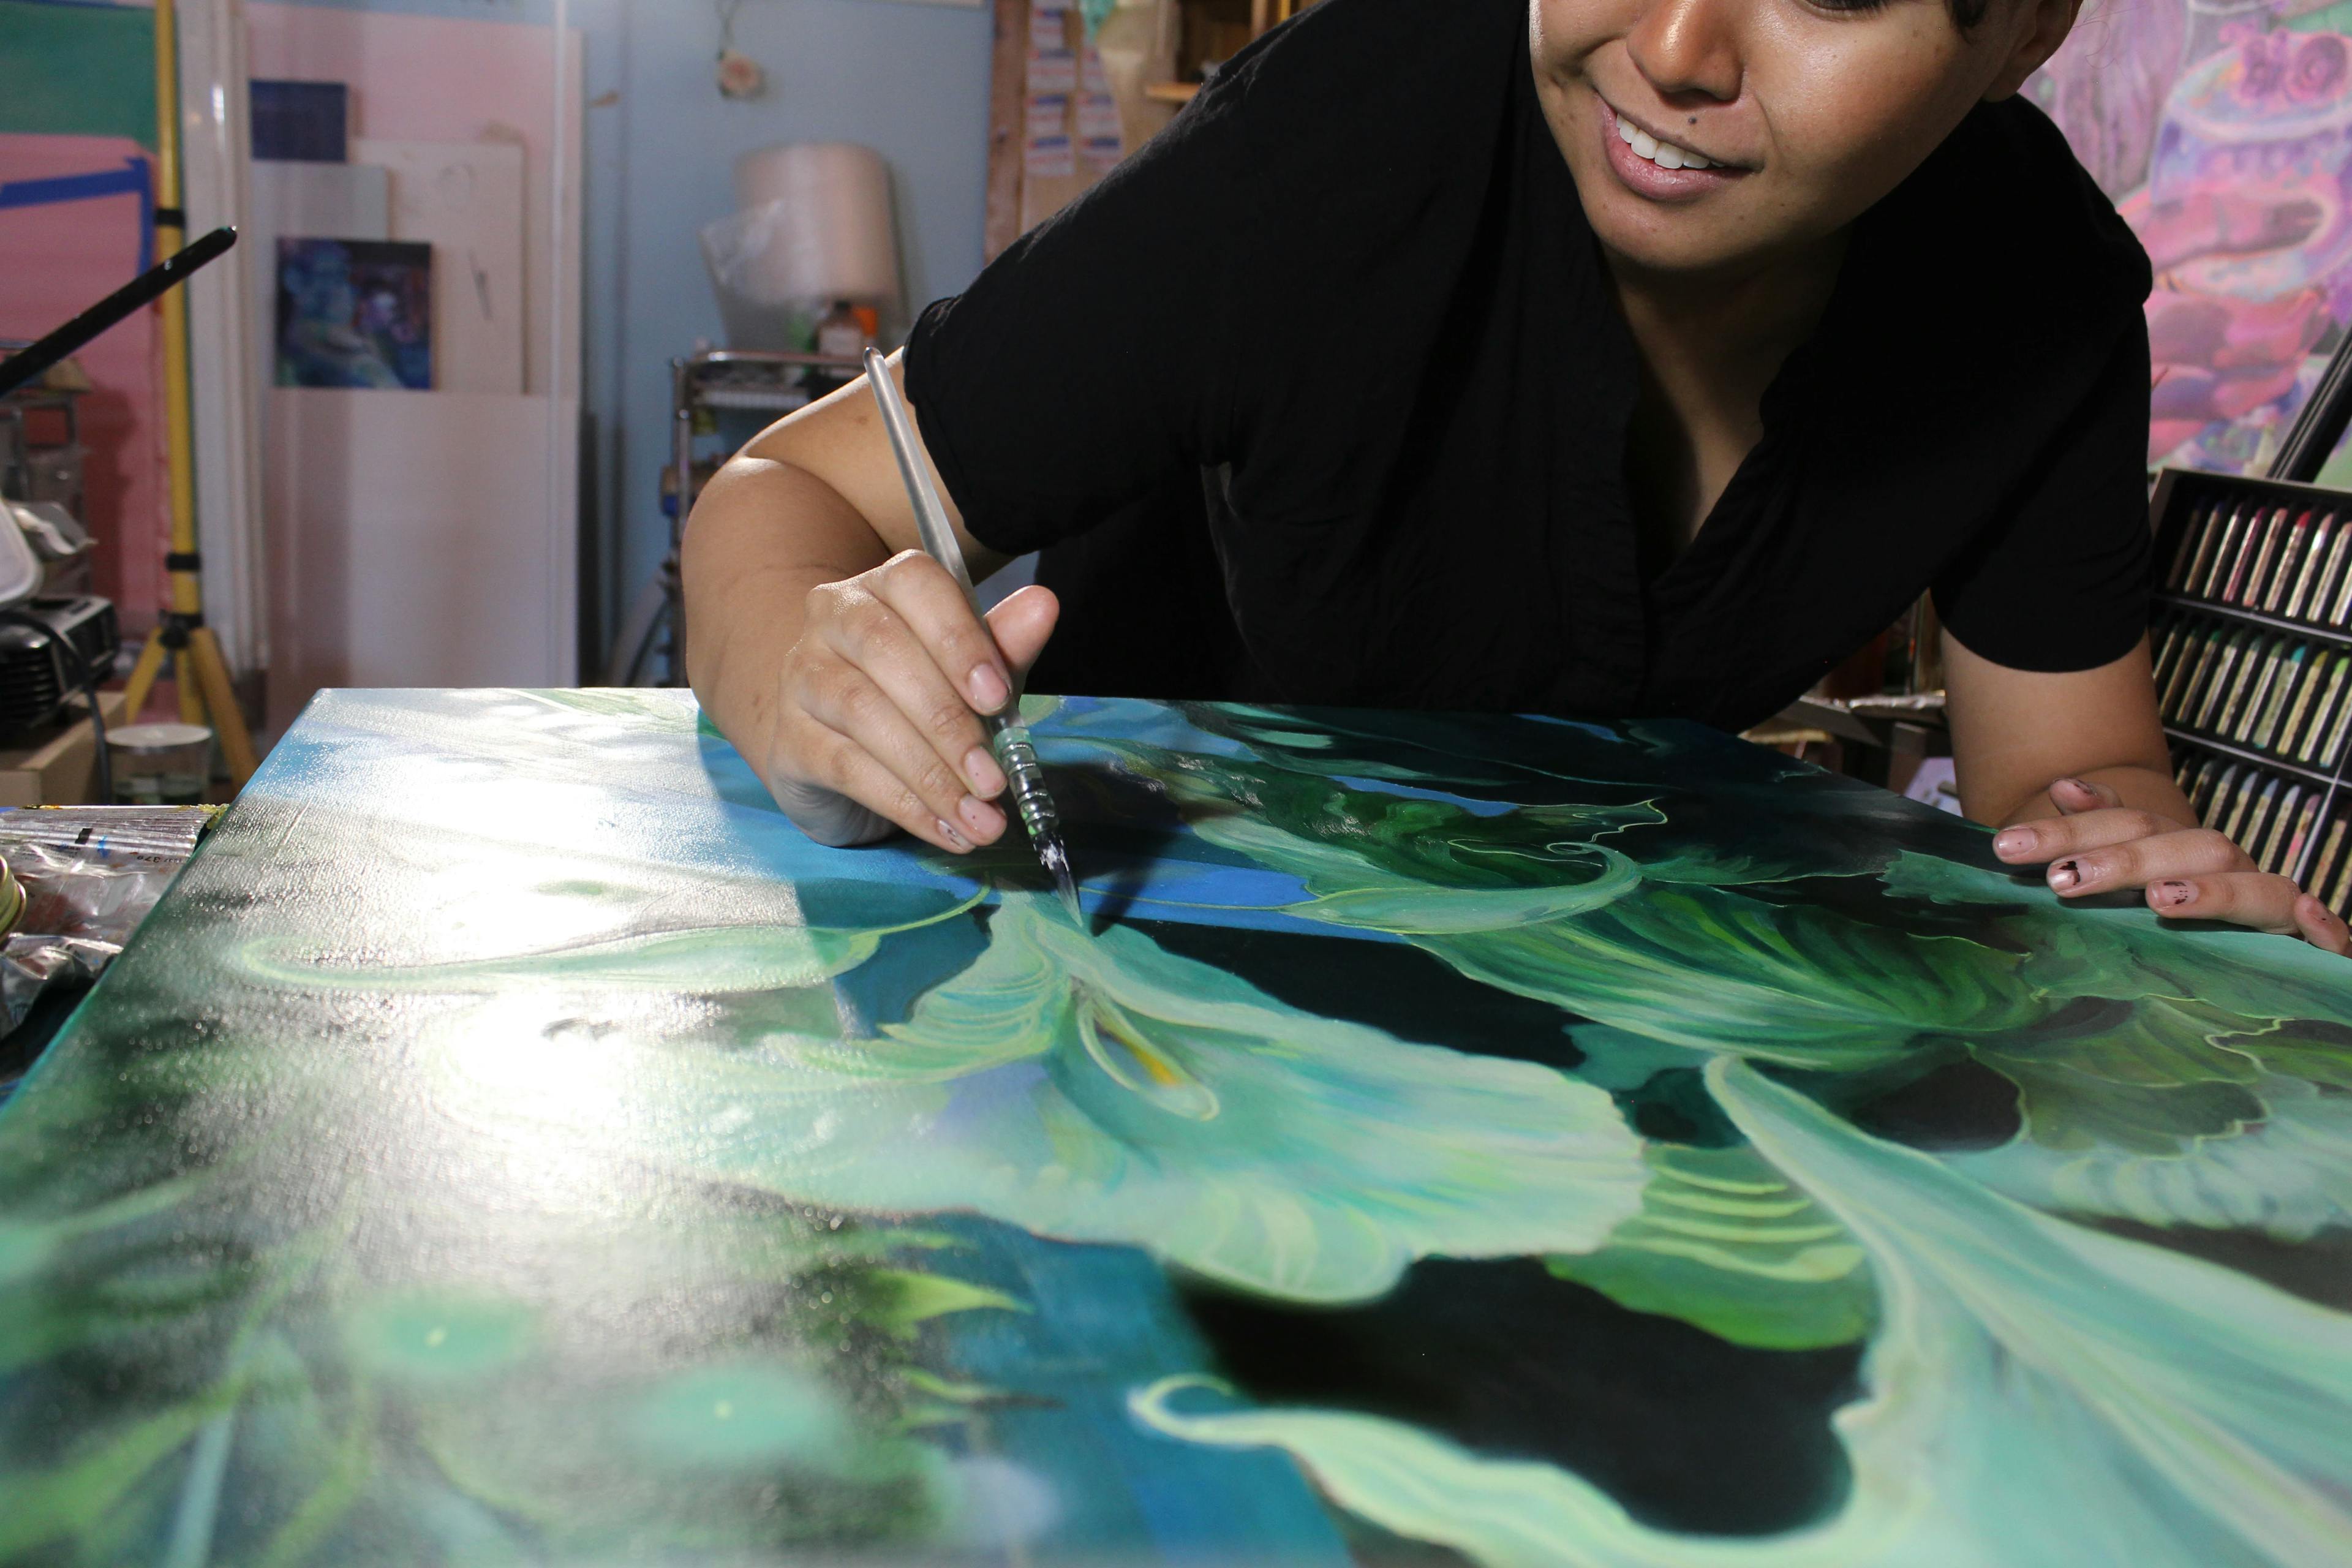 Artist Nefertiti Jenkins working on a painting of green and white flowers in her studio.